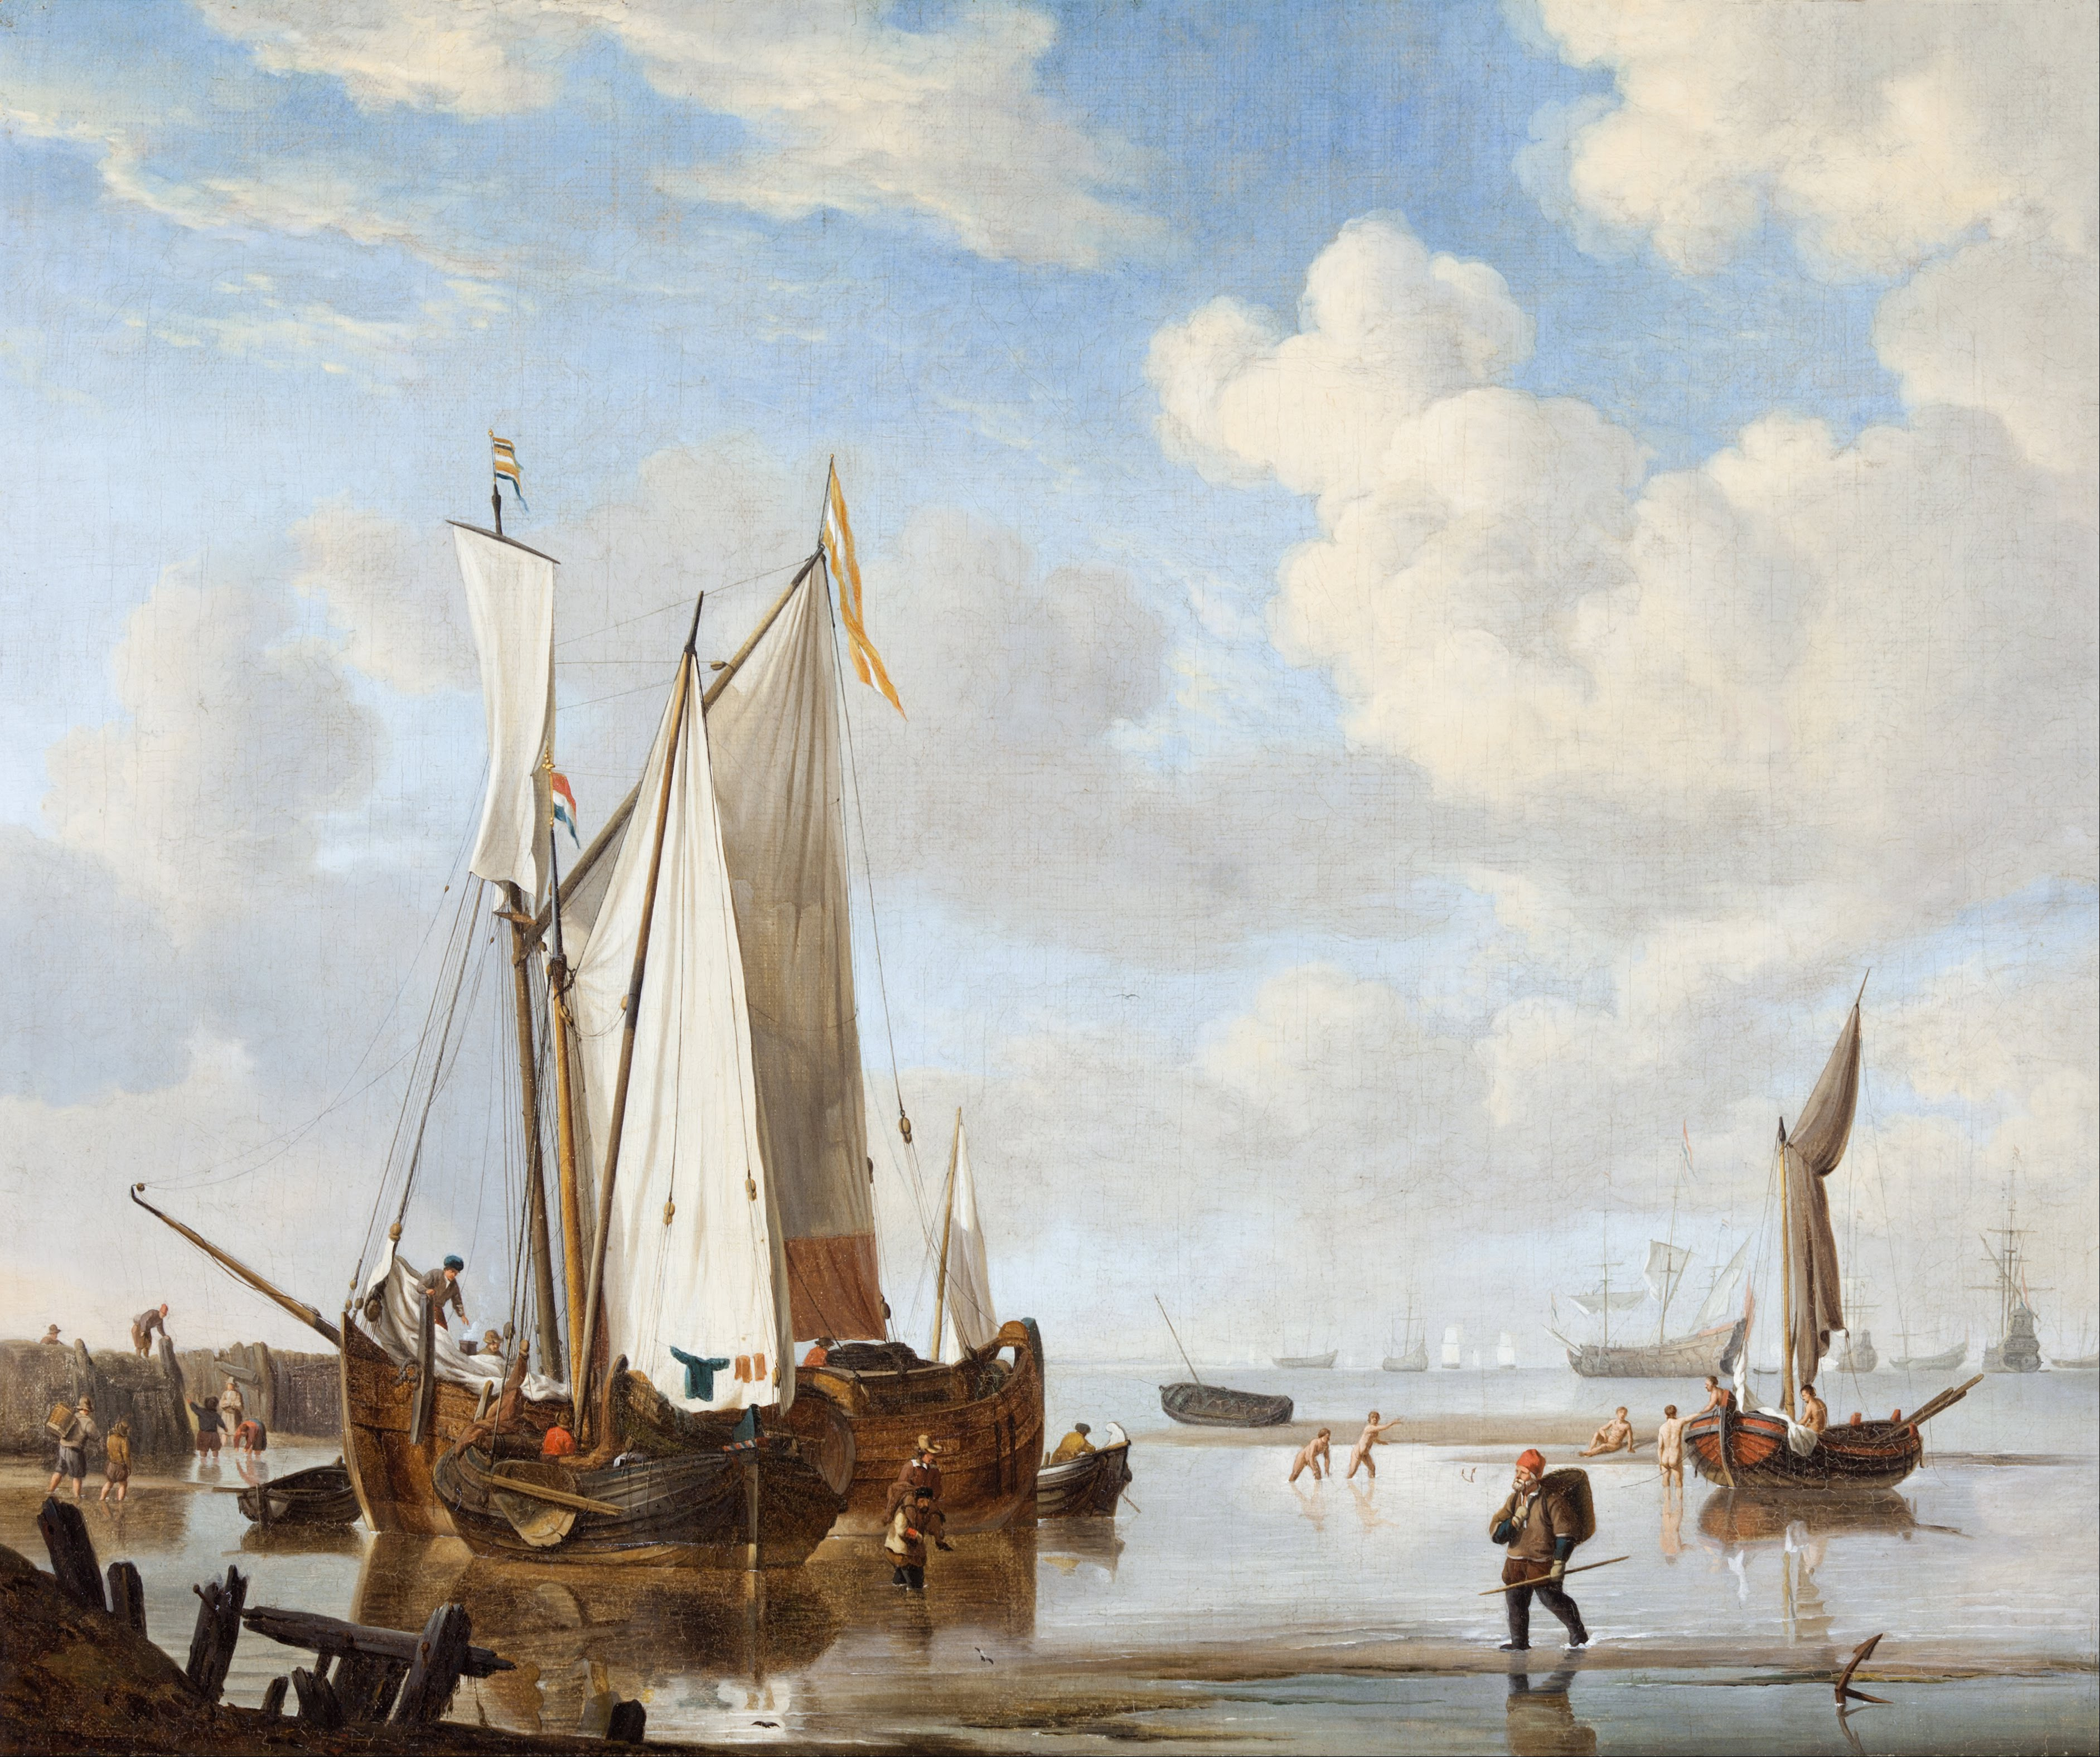 Willem van de VELDE the younger and studio - A wijdschip and a kaag in an inlet close to a sea-wall - Google Art Project